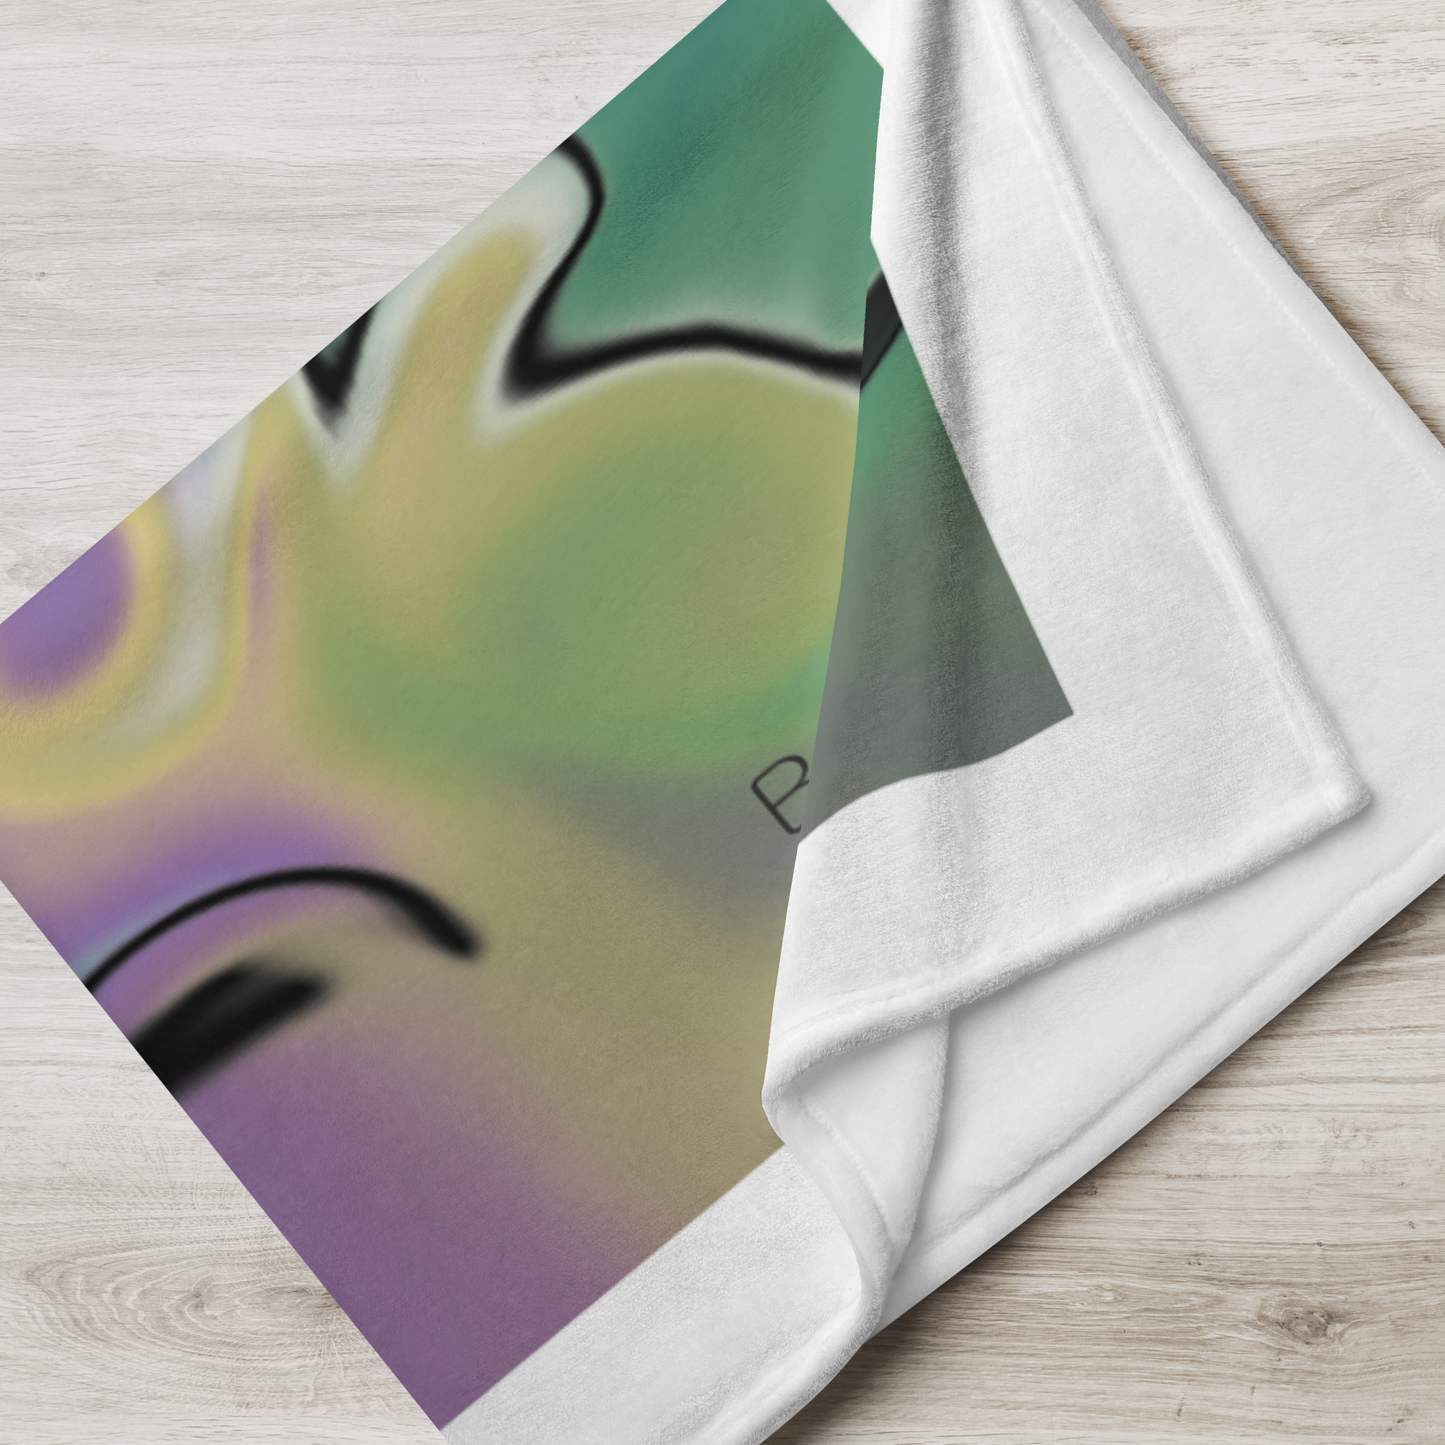 Masquerade BeSculpt Abstract Art Throw Blanket White Trimmed